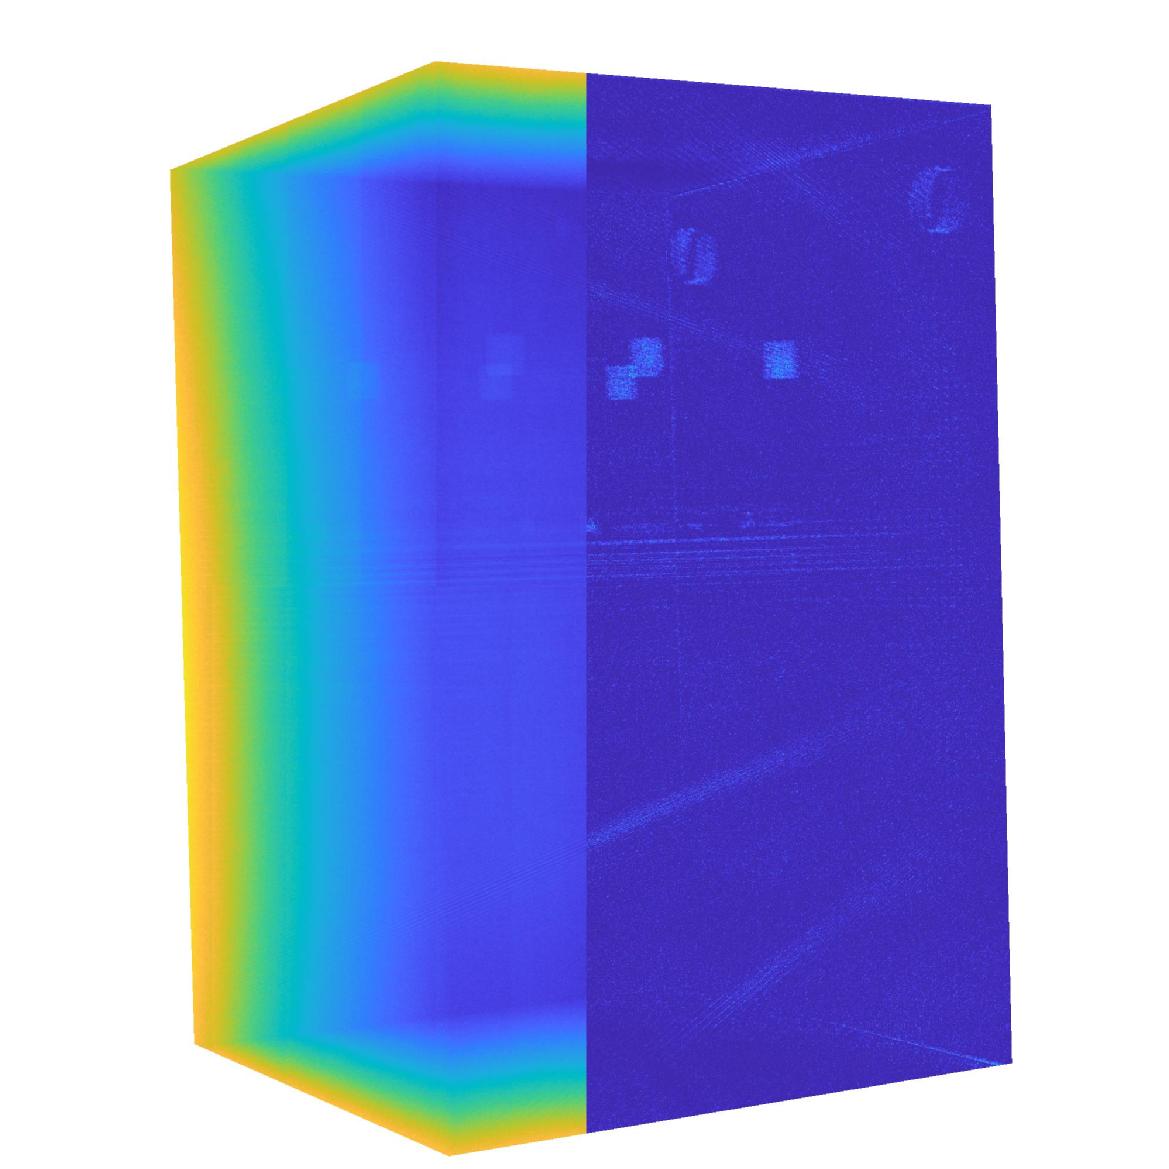 3D Printed Cuboid, left shows x-ray, right shows p-values